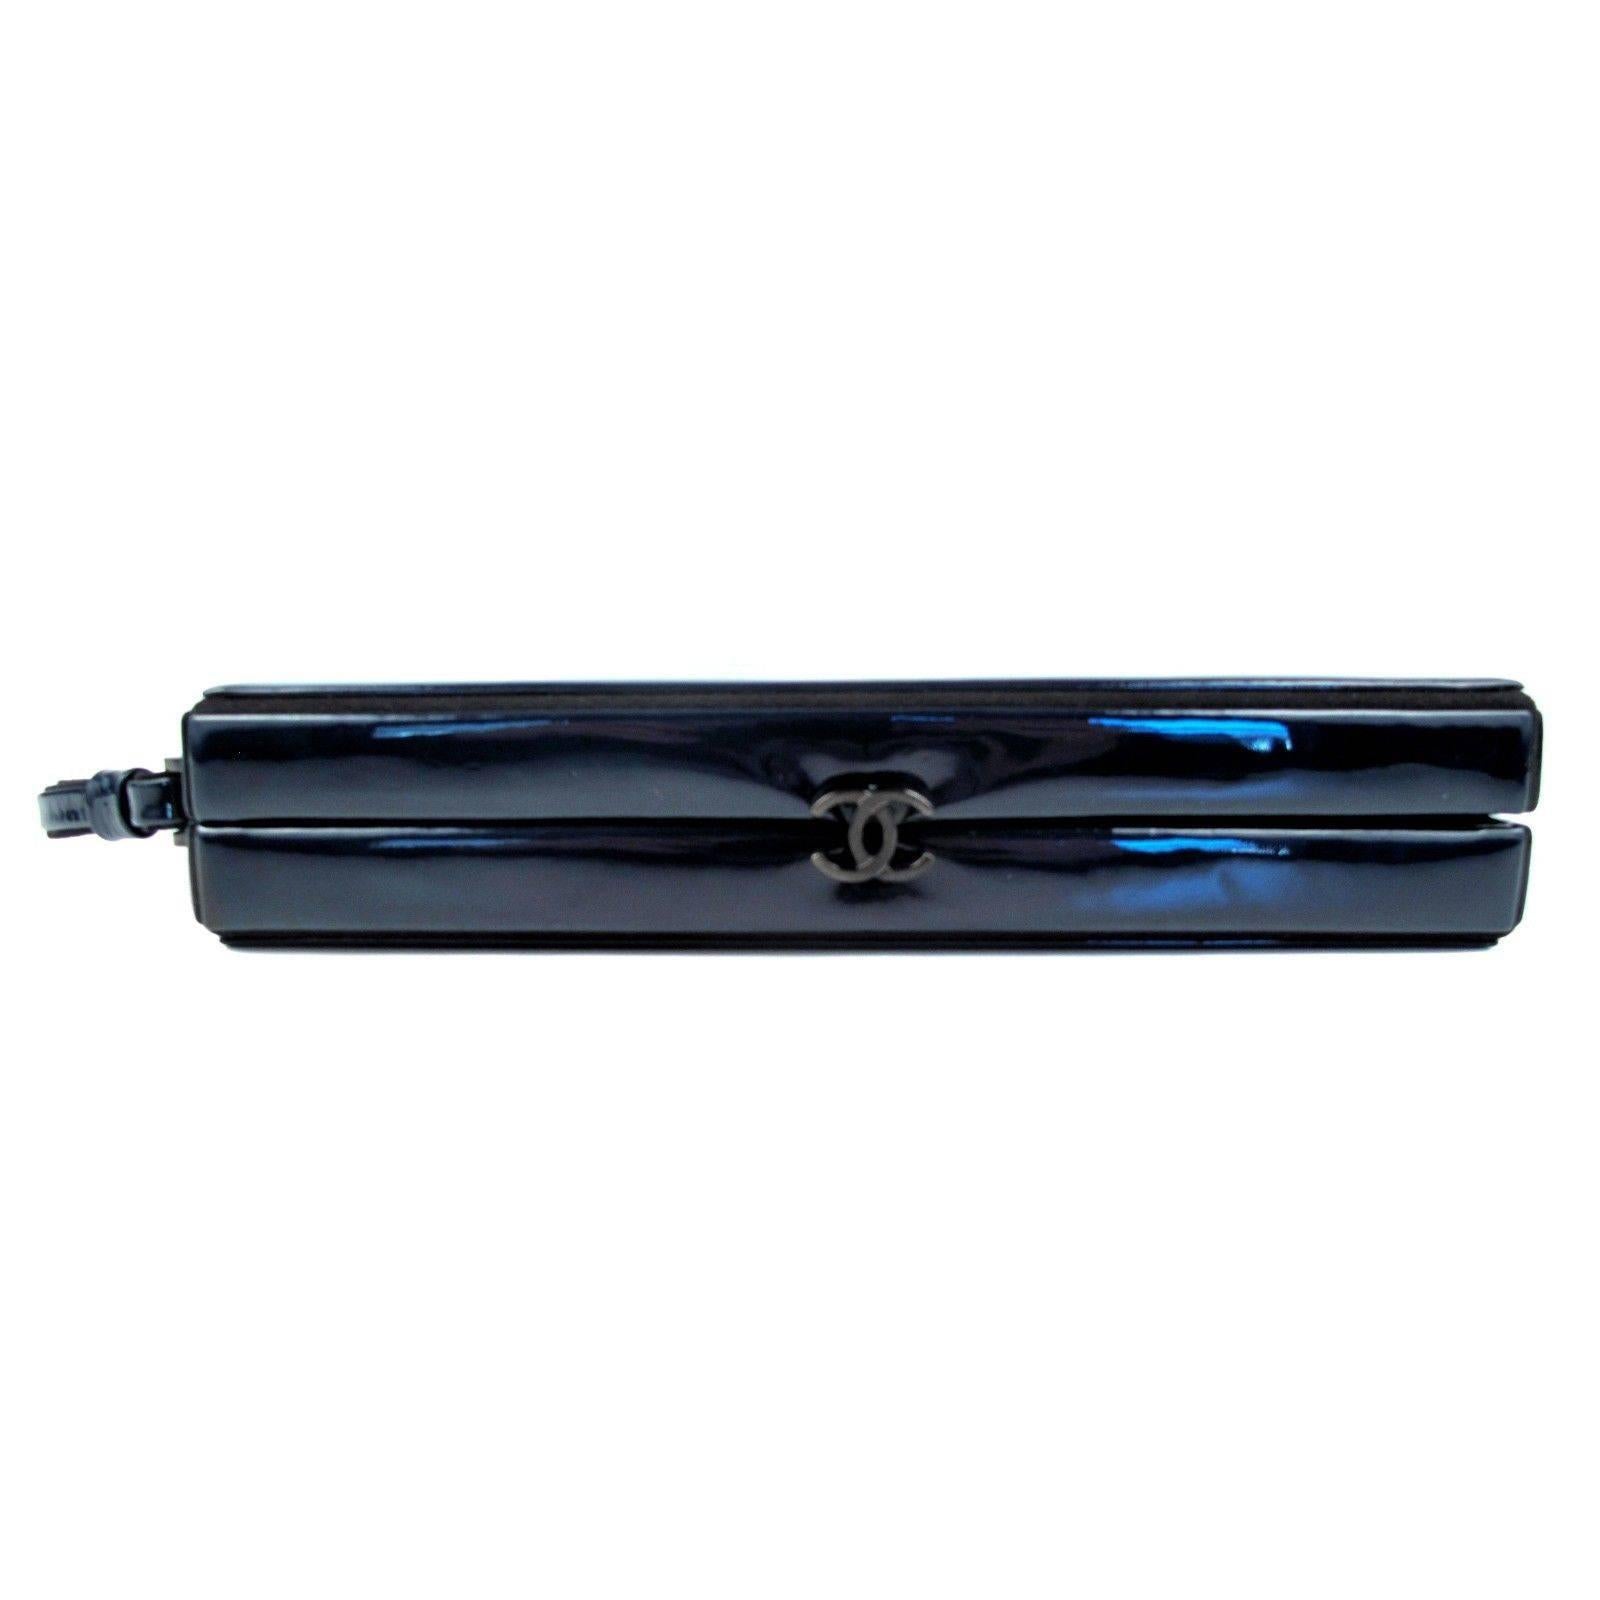 Chanel - Patent Leather Box Clutch

Color: Dark Navy Blue, almost black

Material: Patent Leather

------------------------------------------------------------

Details:

- wrist strap at side

- black trim

- gunmetal tone